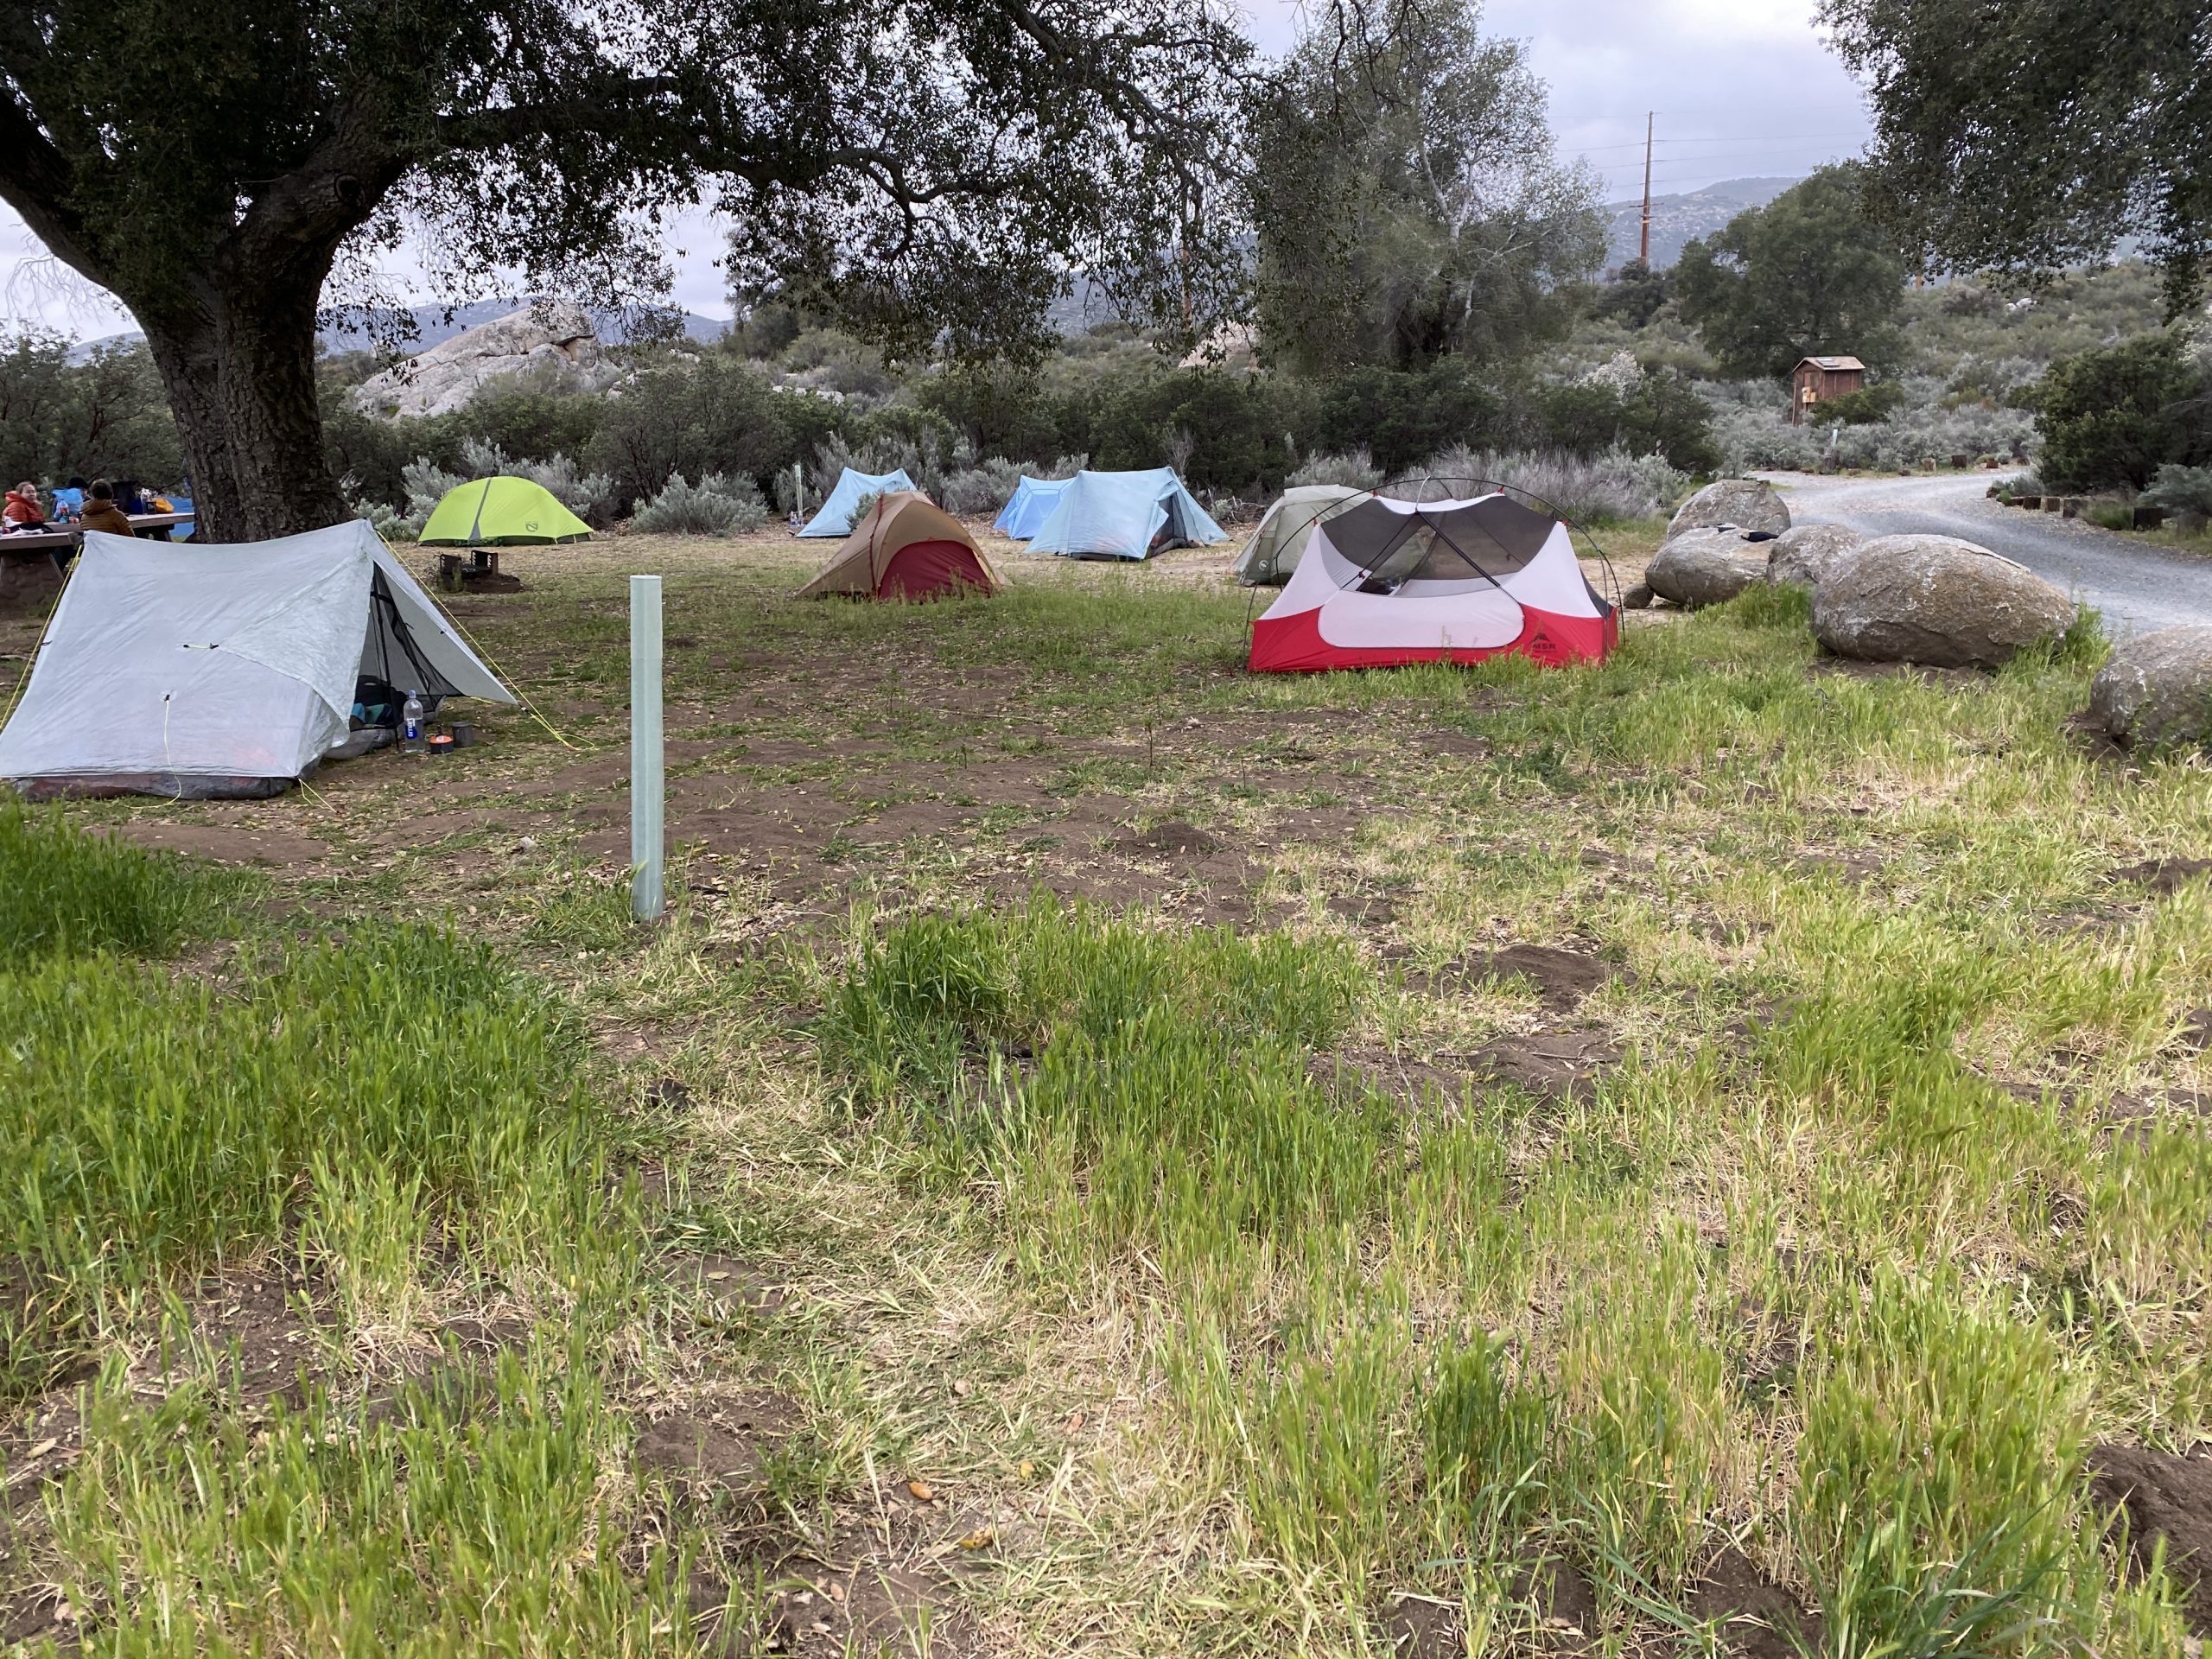 PCT tent city at Boulder Oaks Campground